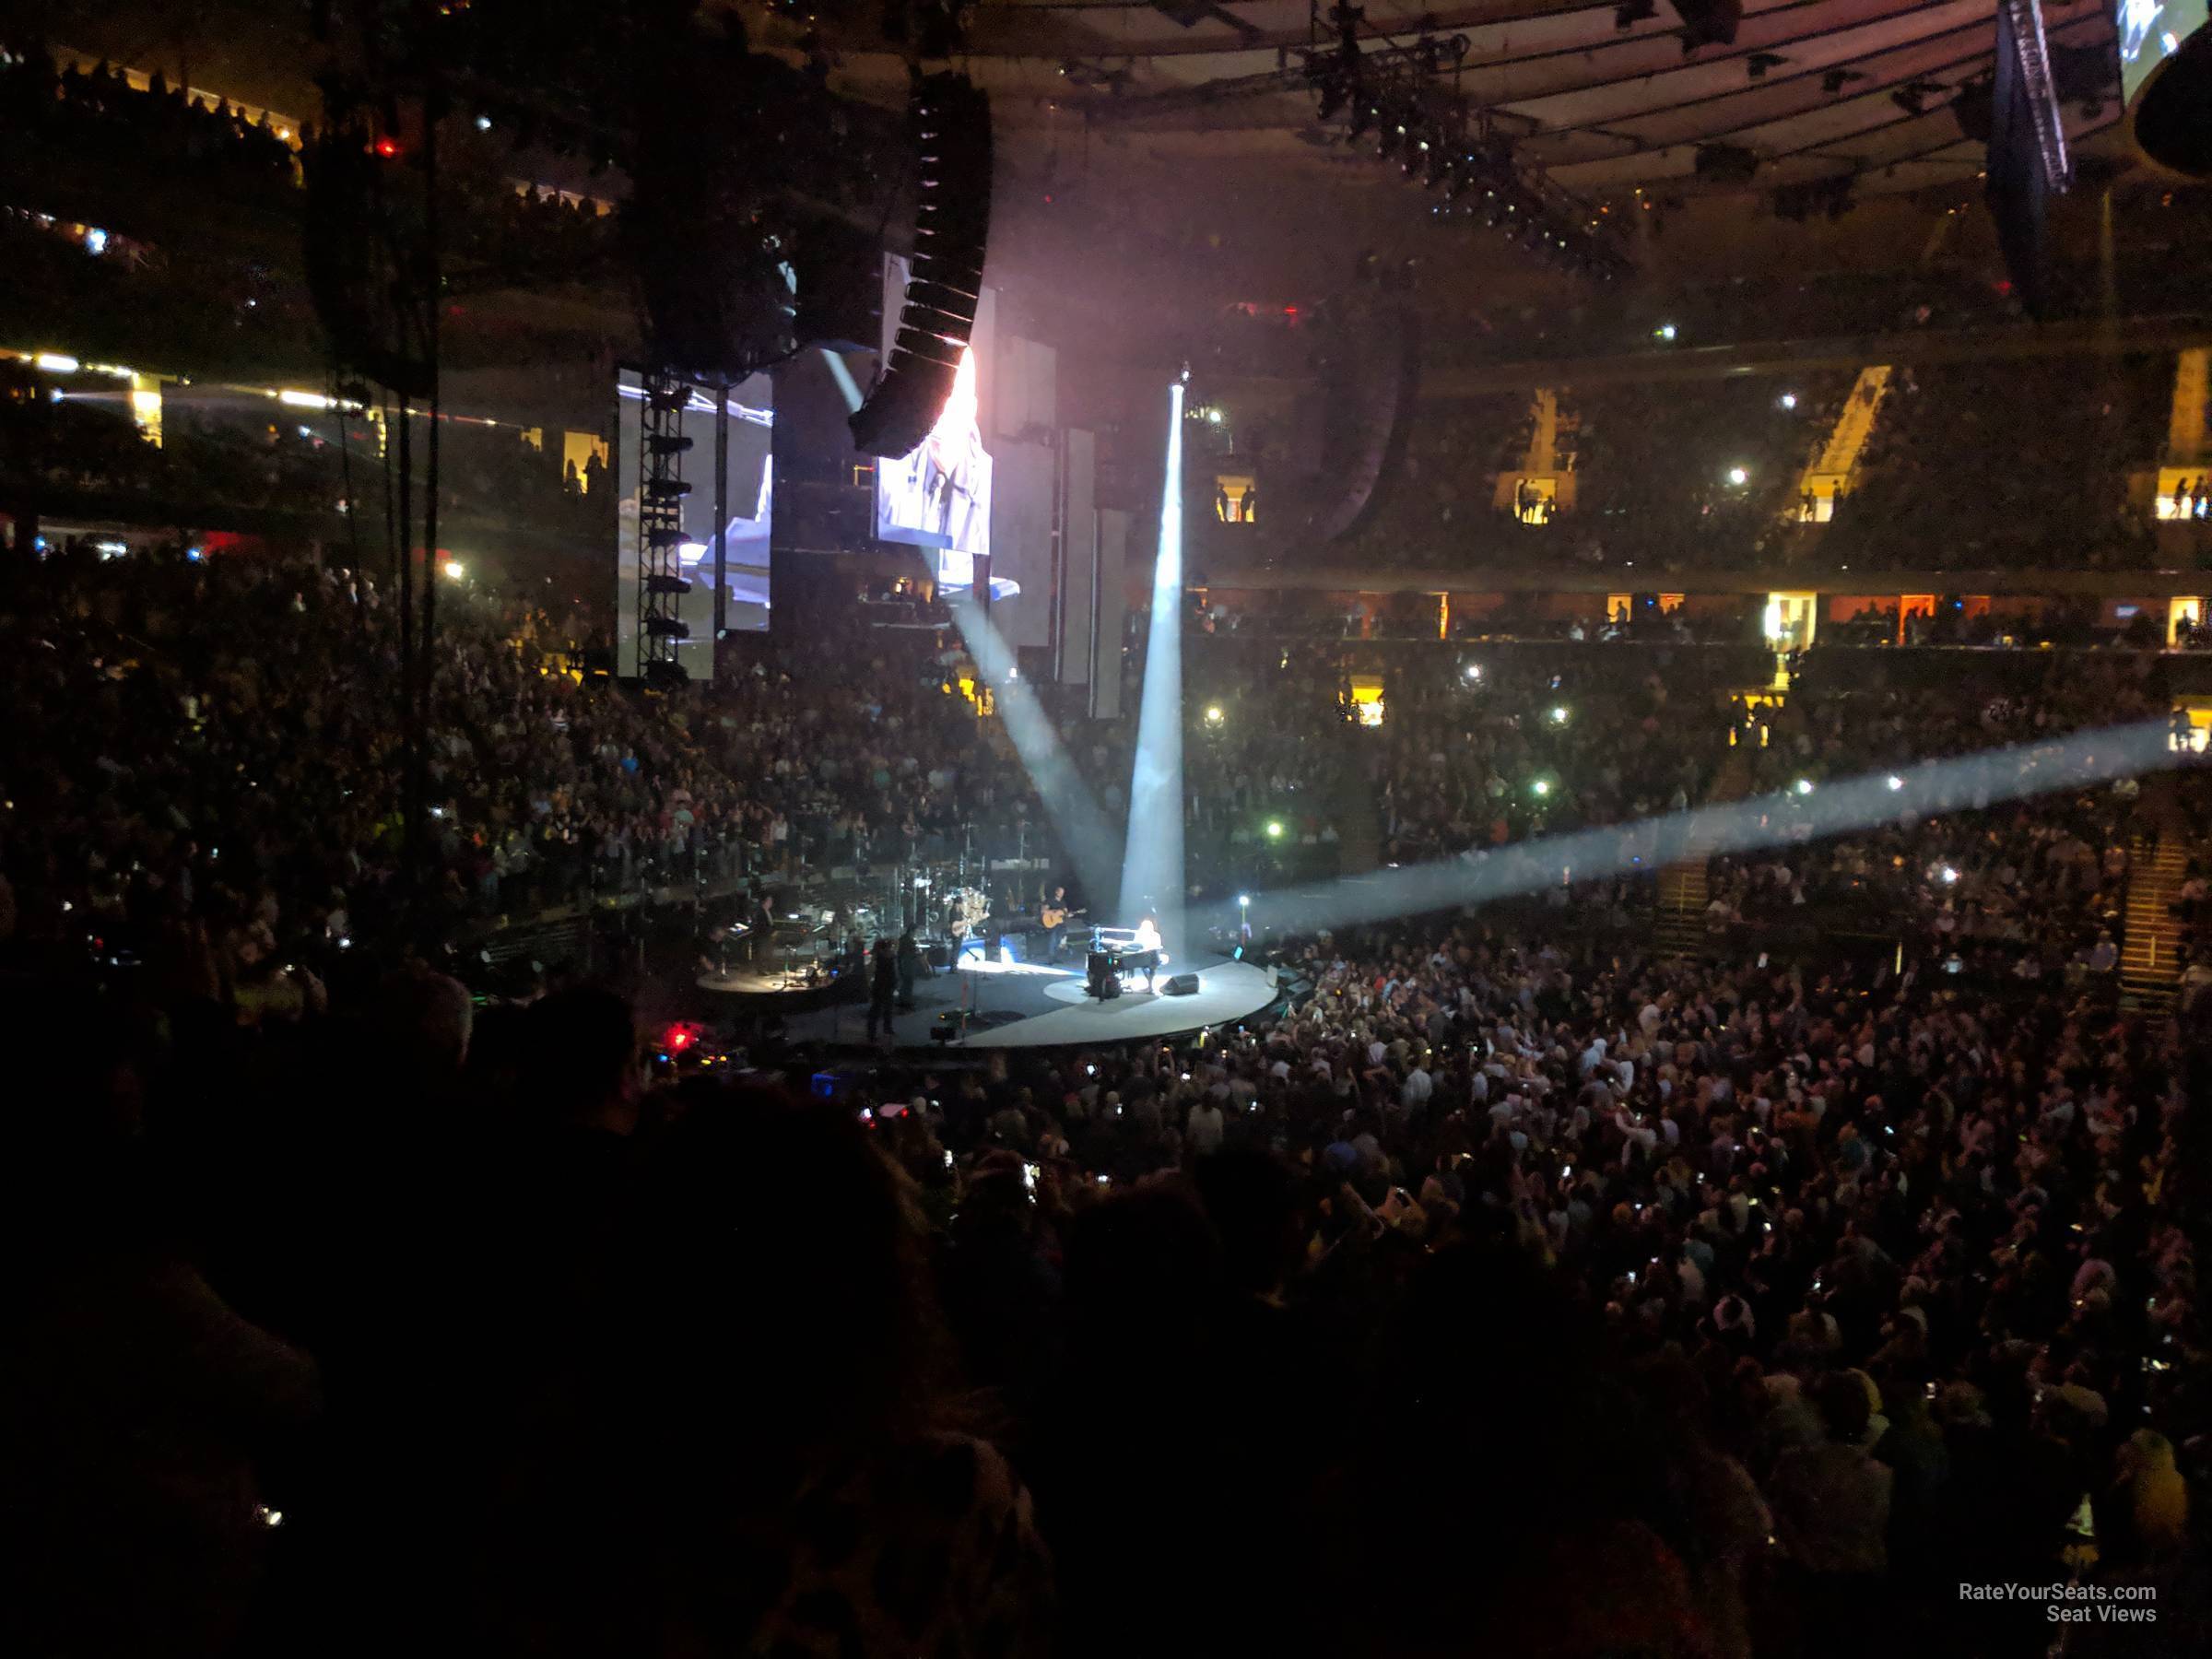 Section 116 At Madison Square Garden